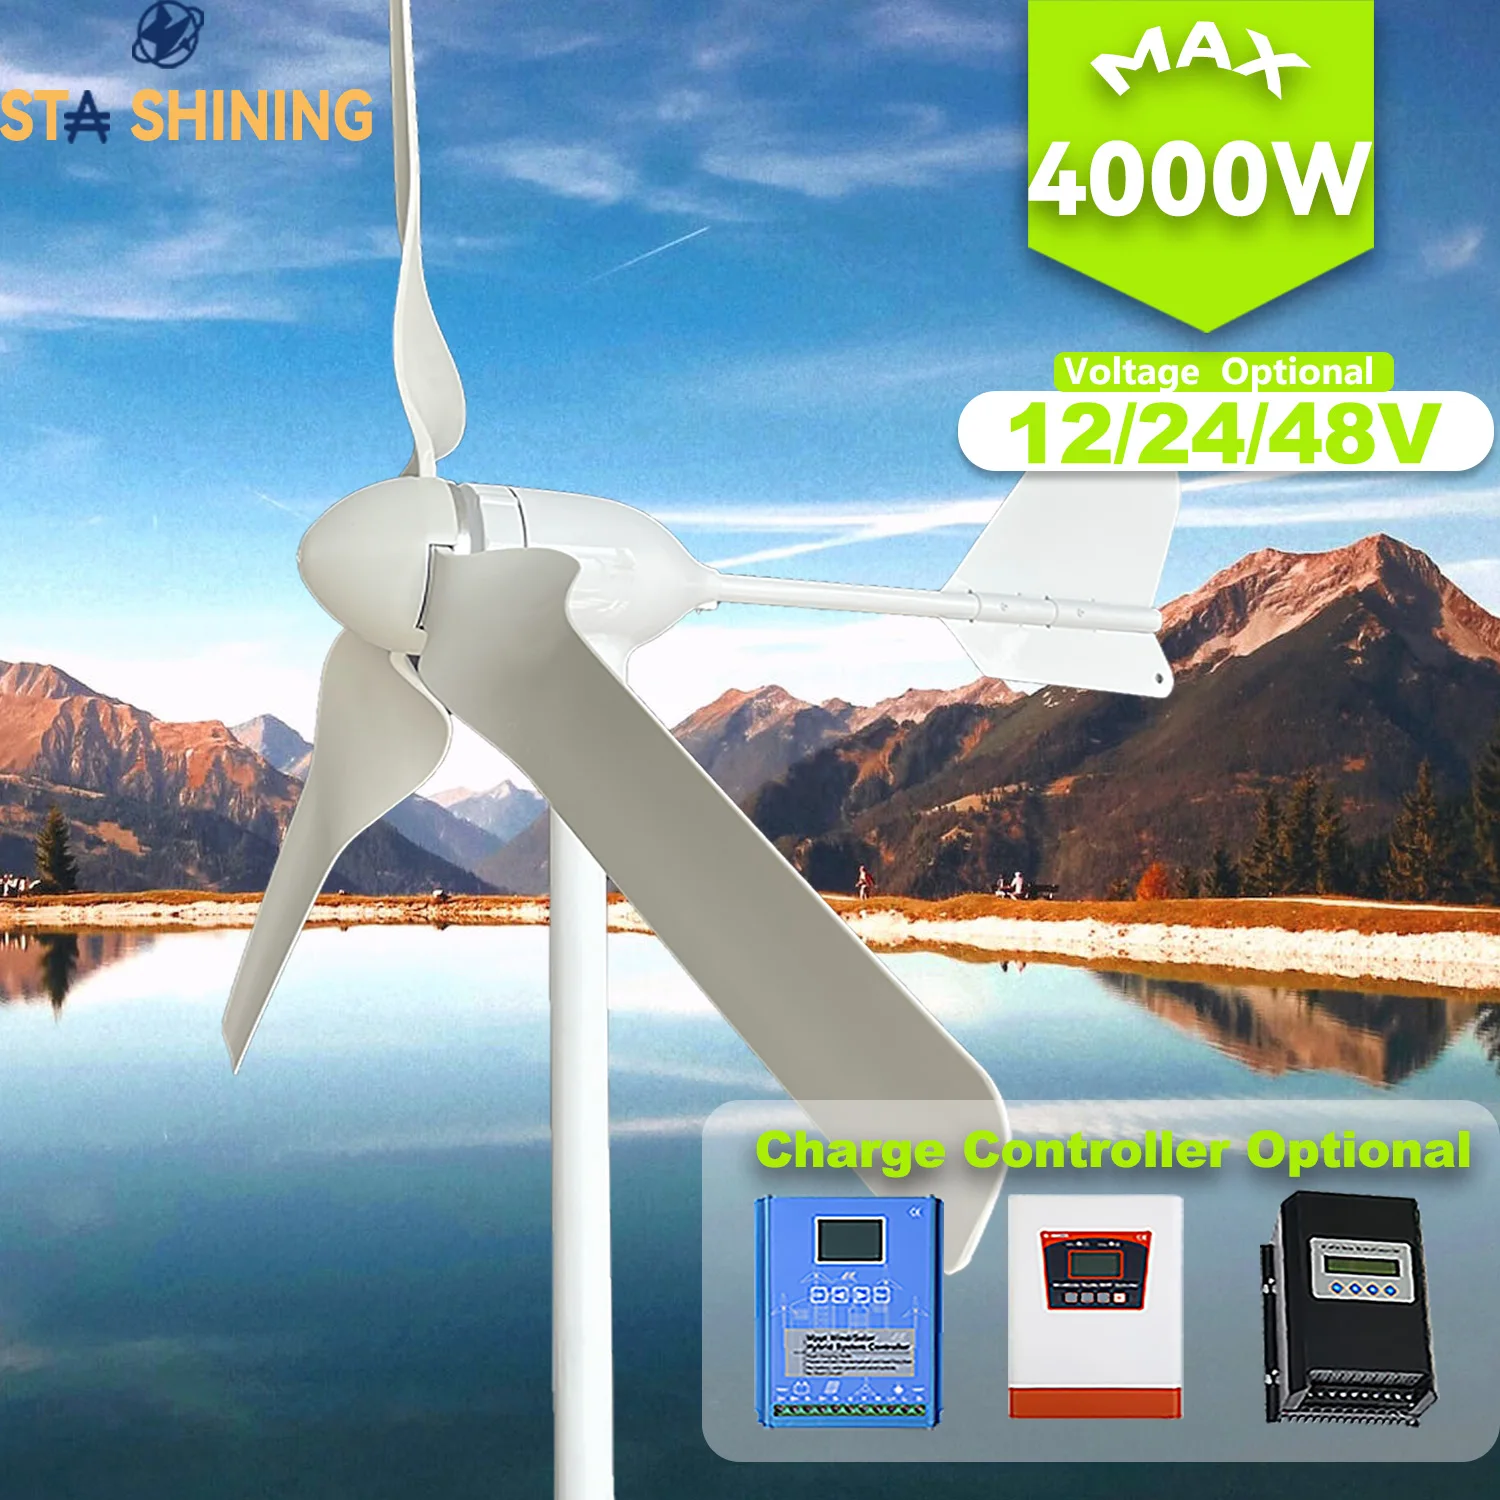 

【Higher Power】 4000W WindTurbine High Efficiency Windmill With MPPTCharger/Hybrid Solar System, For Home Use 6 Blades Horizontal